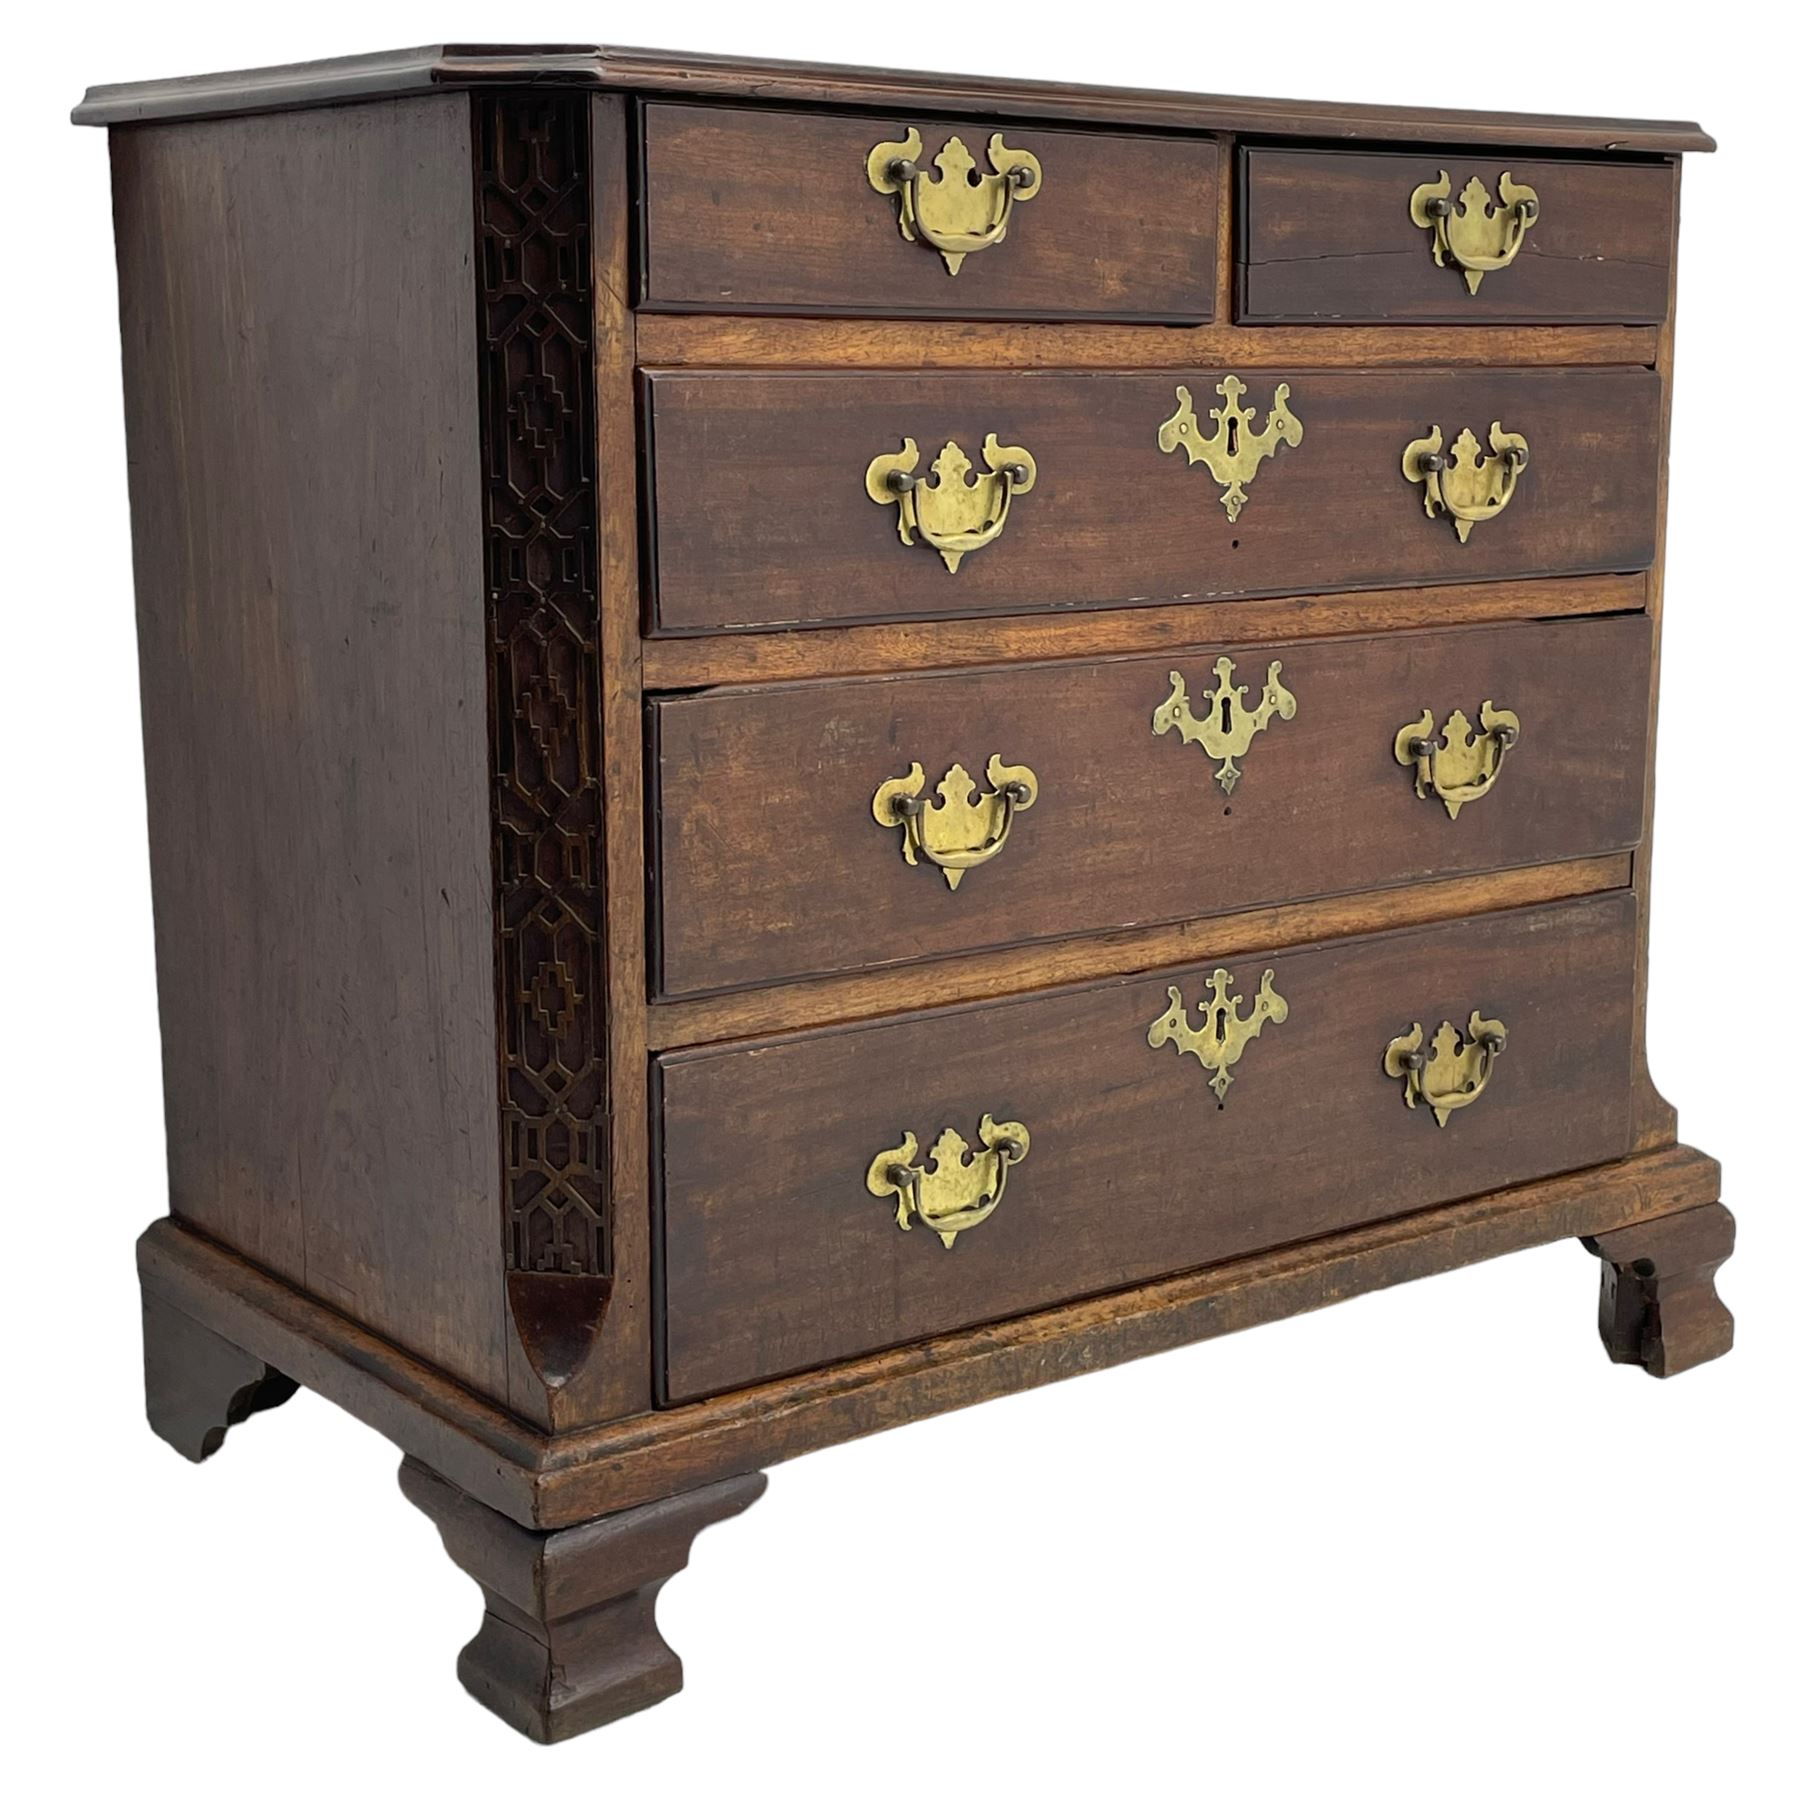 George III Chippendale design mahogany chest - Image 10 of 13